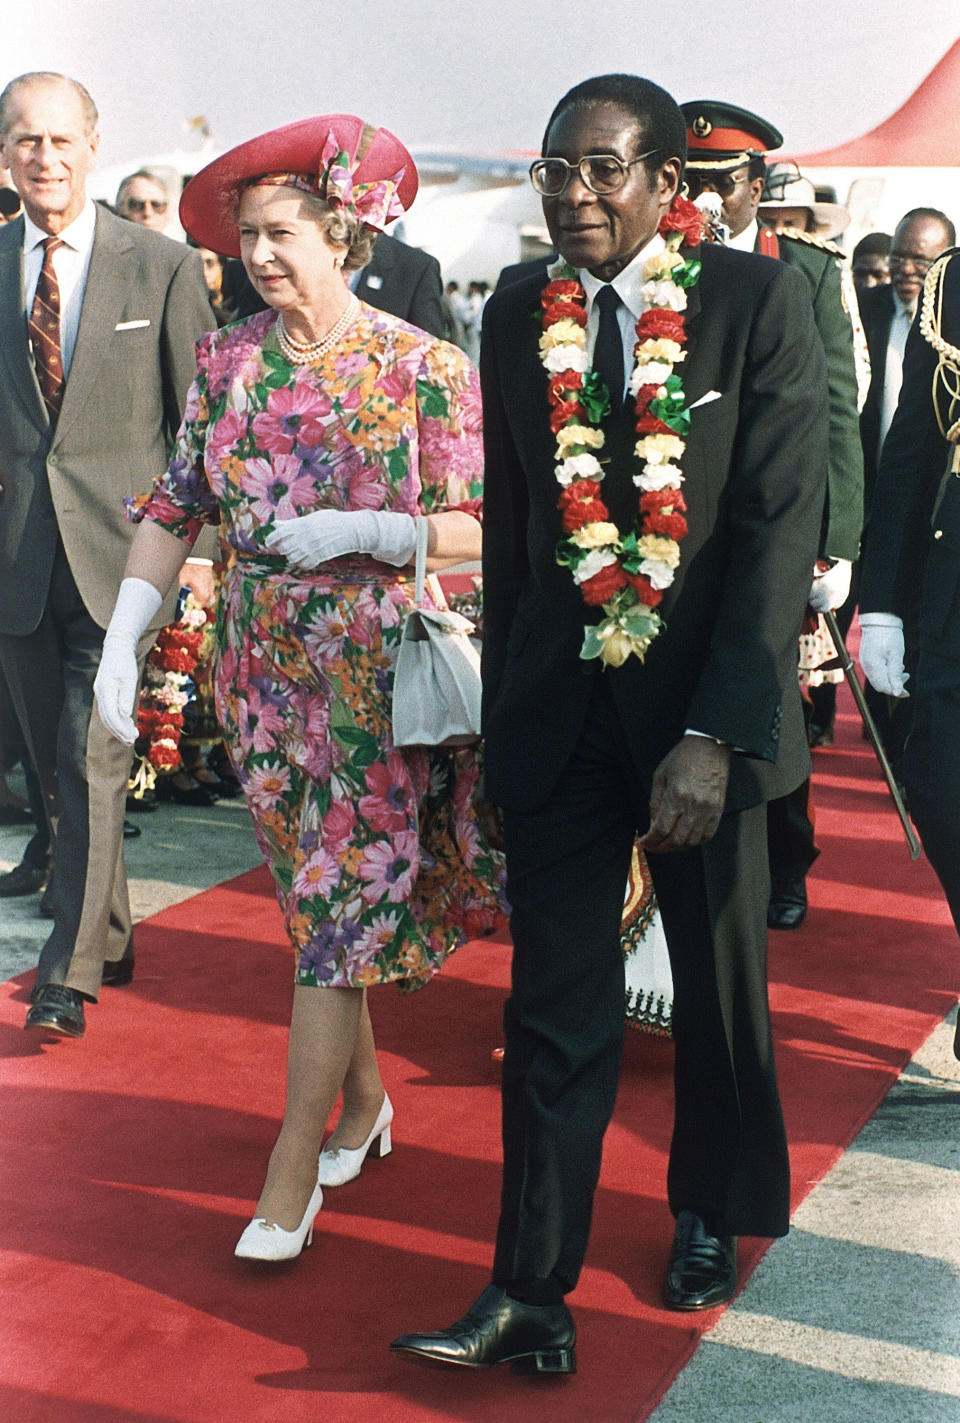 FILE - Britain's Queen Elizabeth II is escorted by Zimbabwean President Robert Mugabe, right, after the Queen's arrival at Harare airport on a second visit to the country, Oct. 10, 1991. After seven decades on the throne, Queen Elizabeth II is widely viewed in the U.K. as a rock in turbulent times. But in Britain’s former colonies, many see her as an anchor to an imperial past whose damage still lingers. (AP Photo/Gill Allen, File)